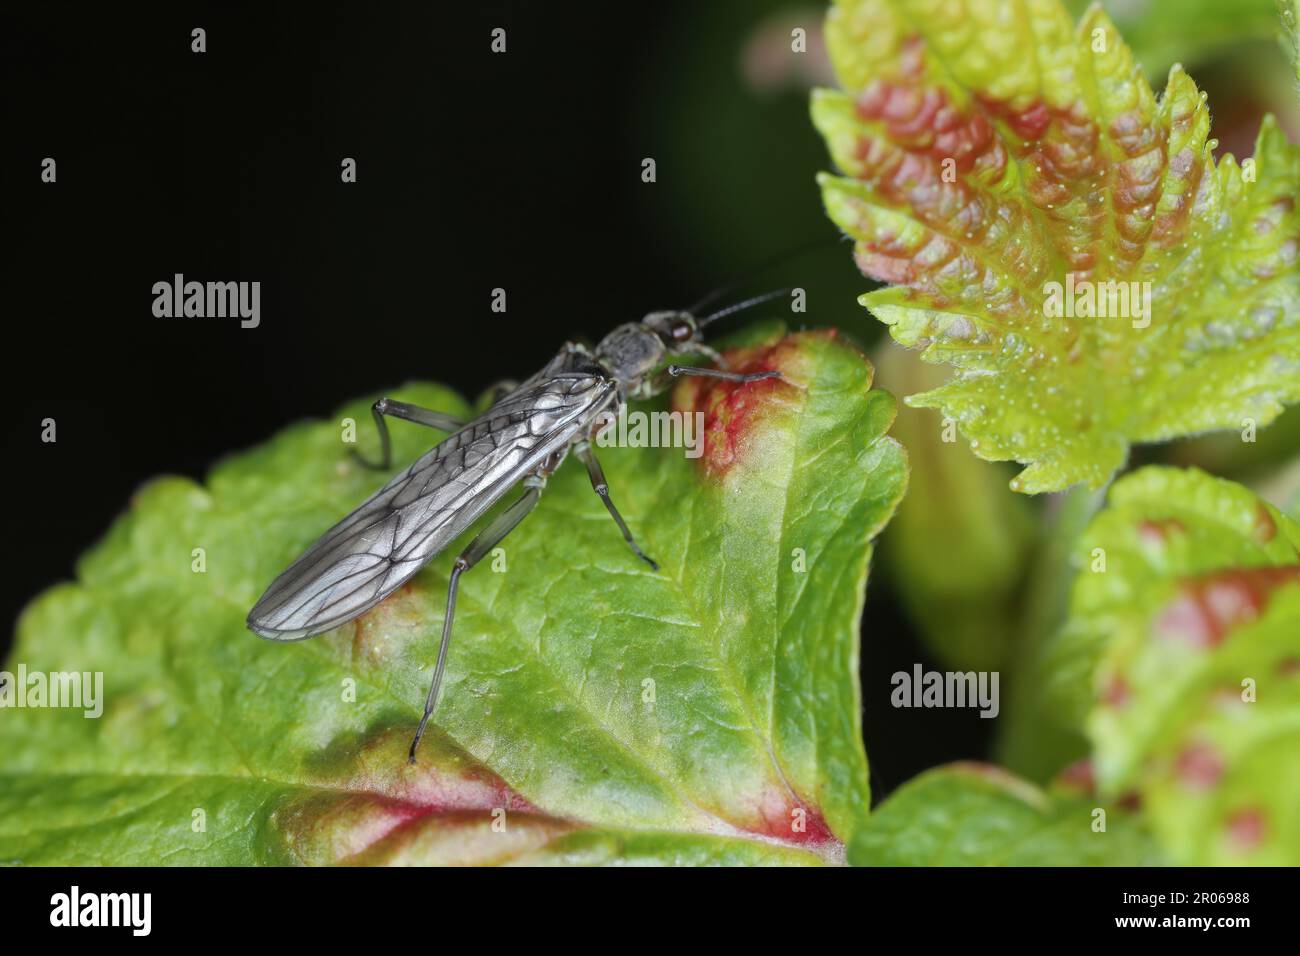 Adult of Perla sp. (Perlidae, Plecoptera). Insect commonly known as stoneflie. Stock Photo